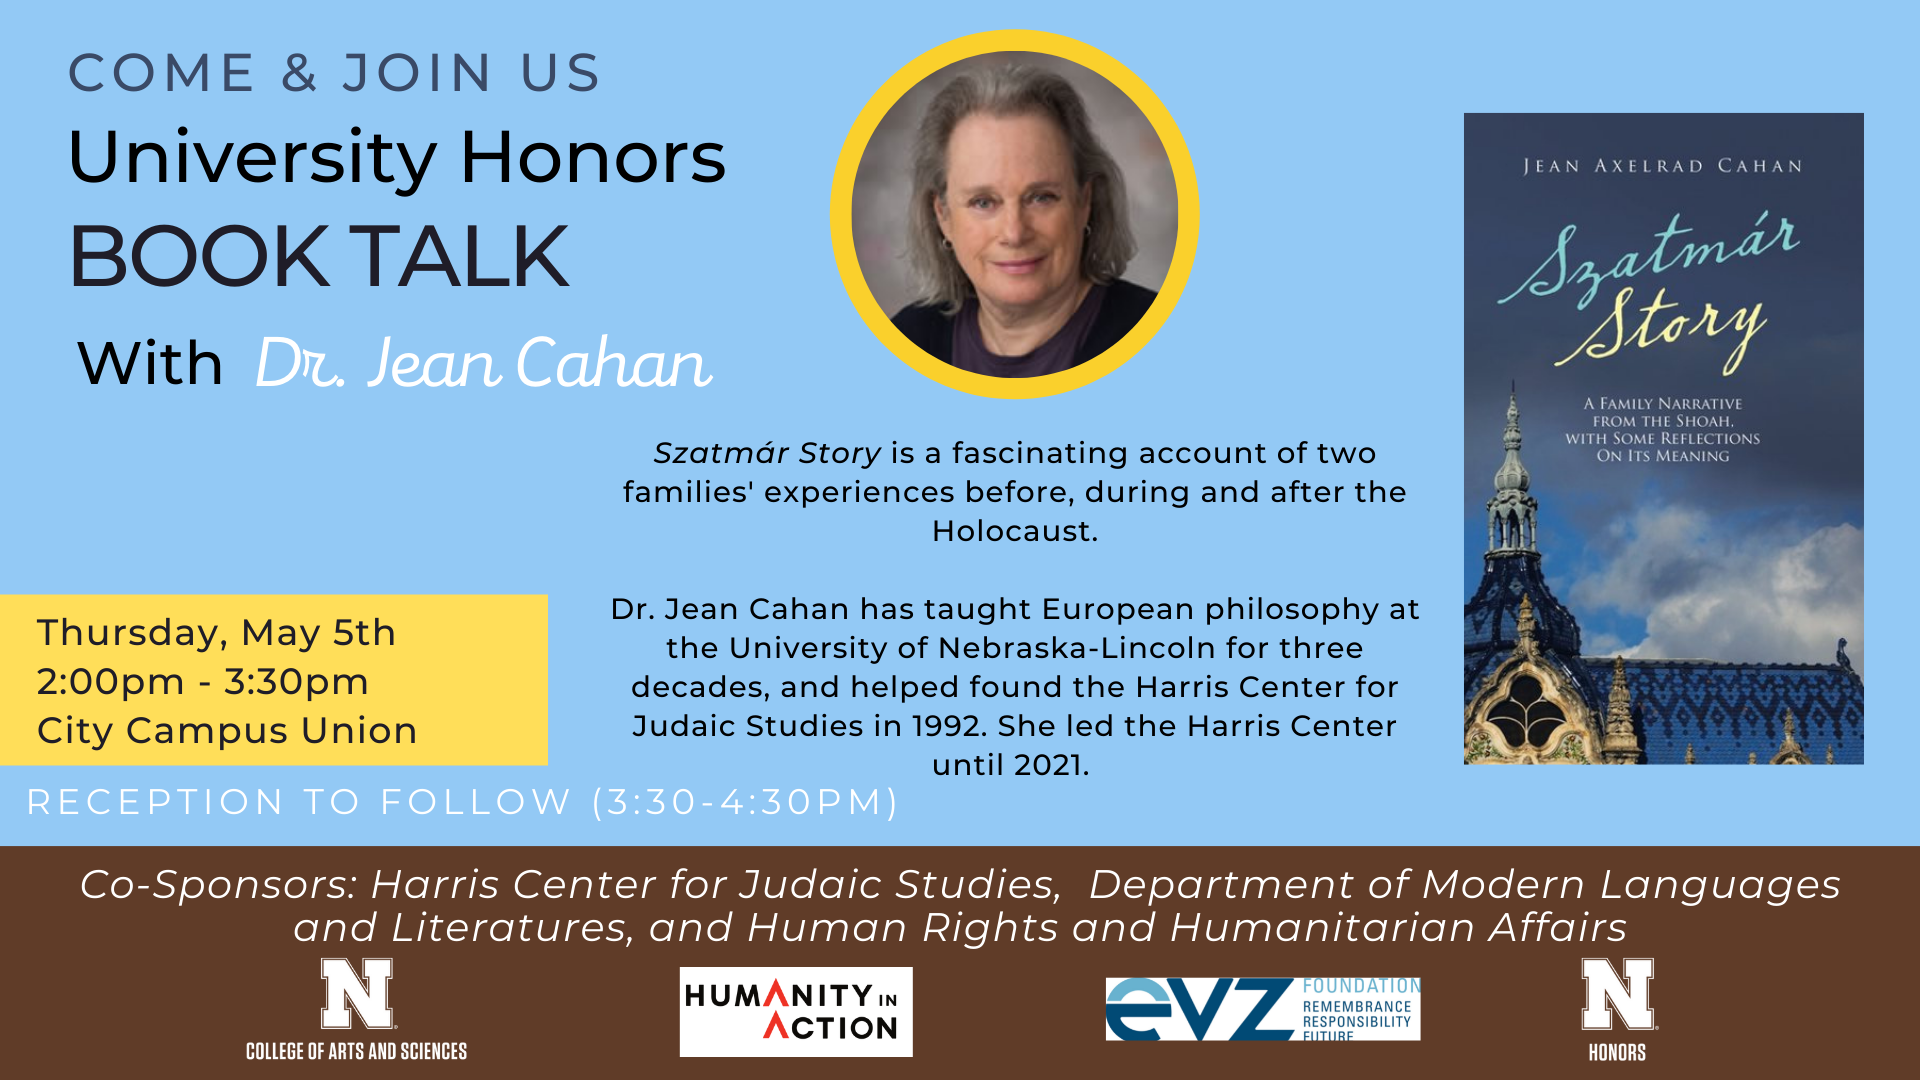 Join us for a book talk with Dr. Jean Cahan!